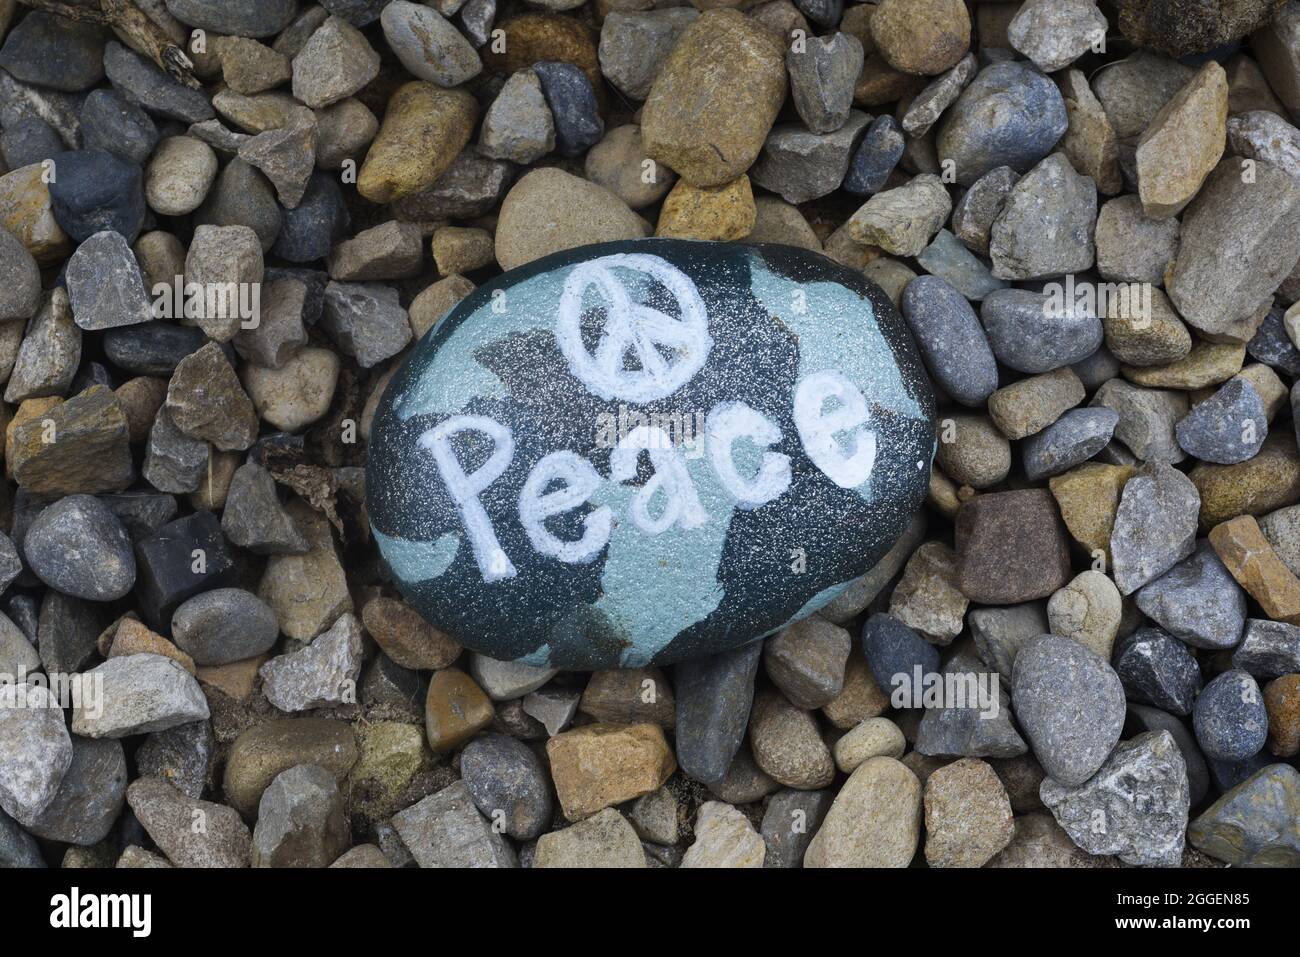 Peace, painted on a stone. With traditional peace symbol on a camouflage background. On a gravel or stone drive. Peace concept no people. Stock Photo